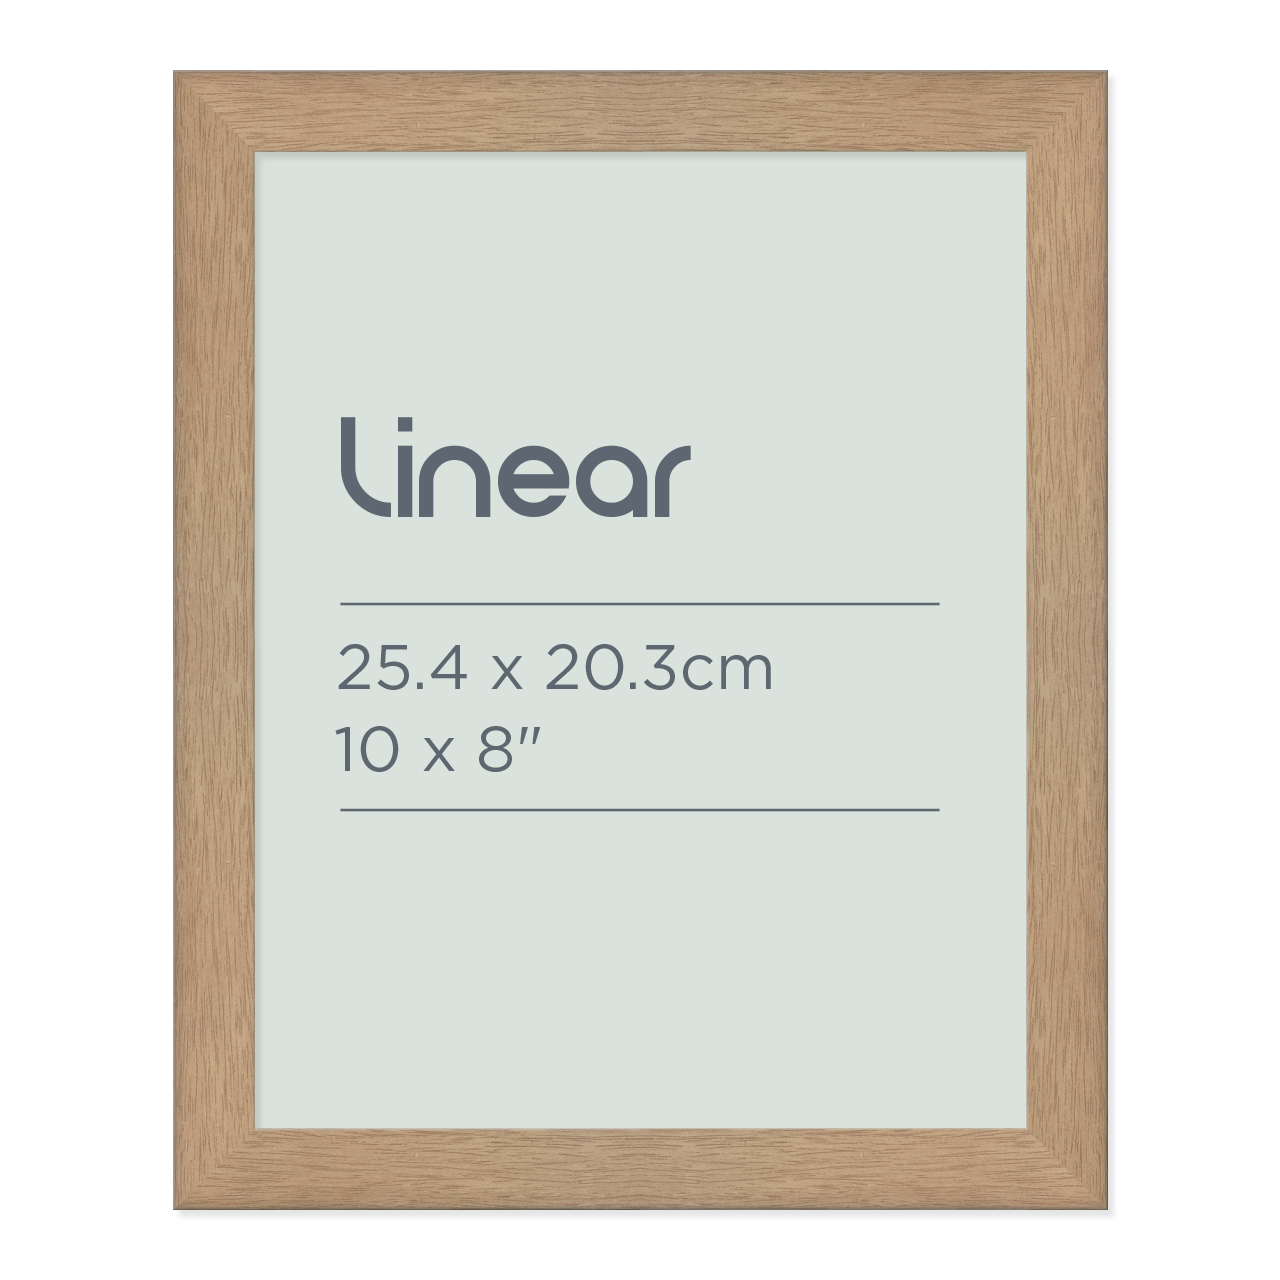 Linear Natural Picture Frame for 25.4 x 20.3cm Artwork